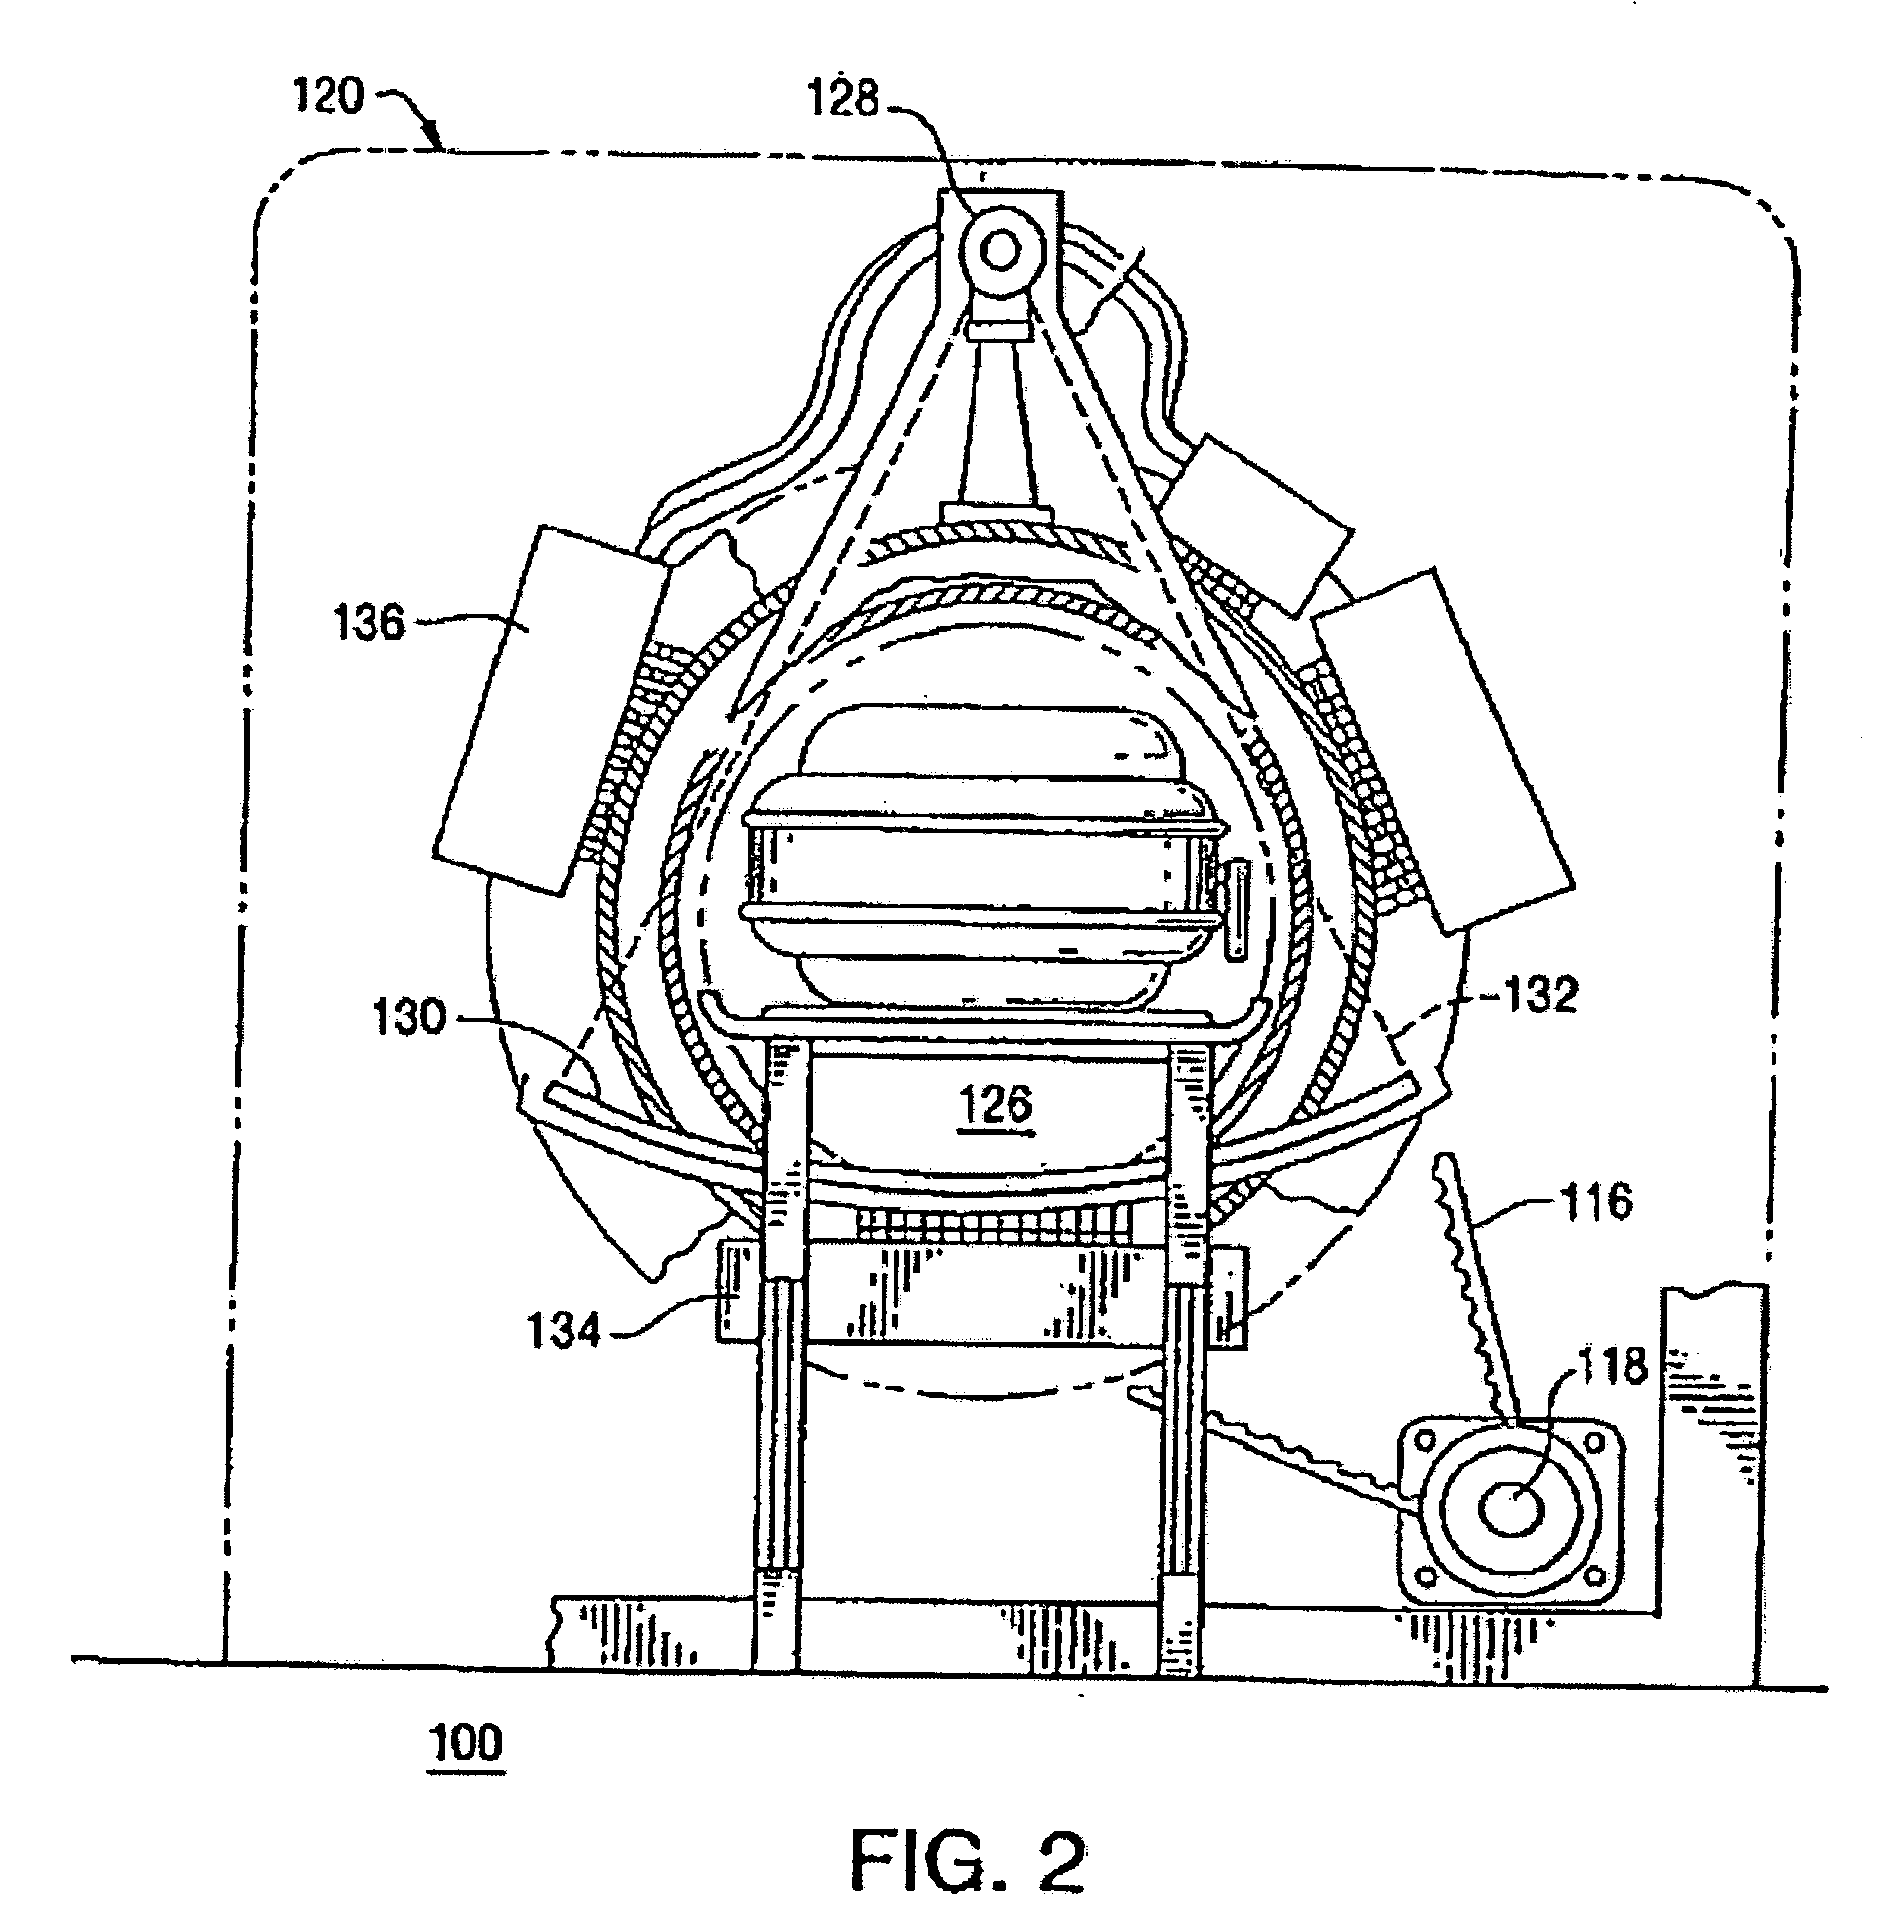 Method of and system for sharp object detection using computed tomography images